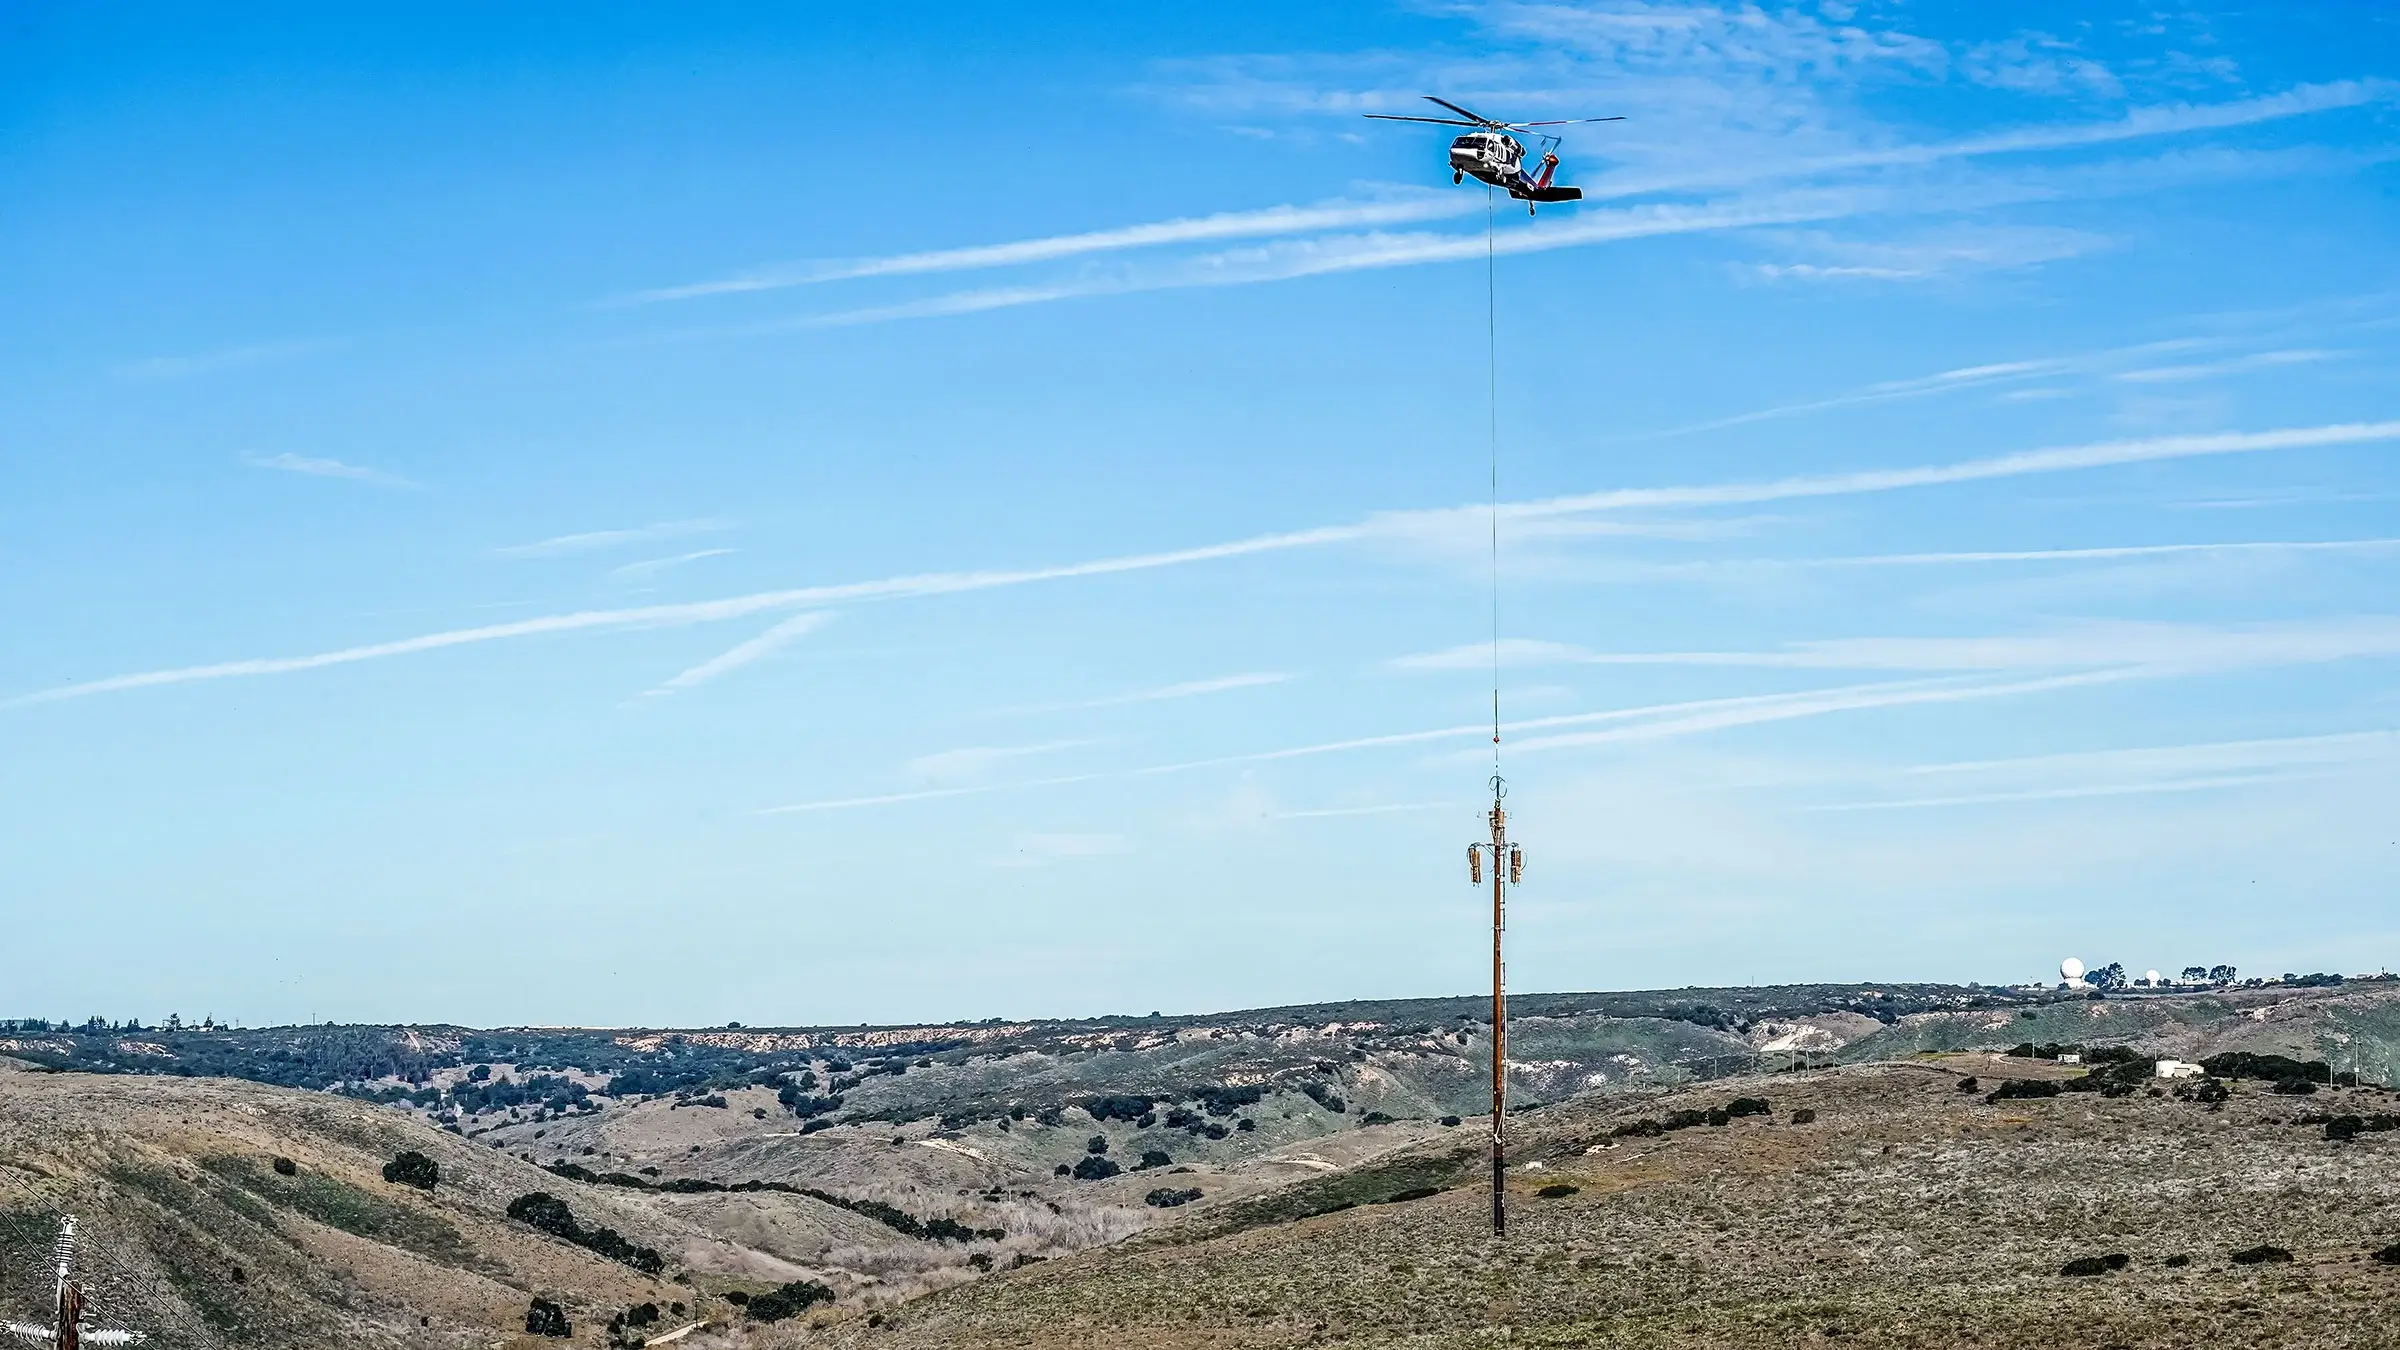 A large helicopter assists in the replacement of a large power pole